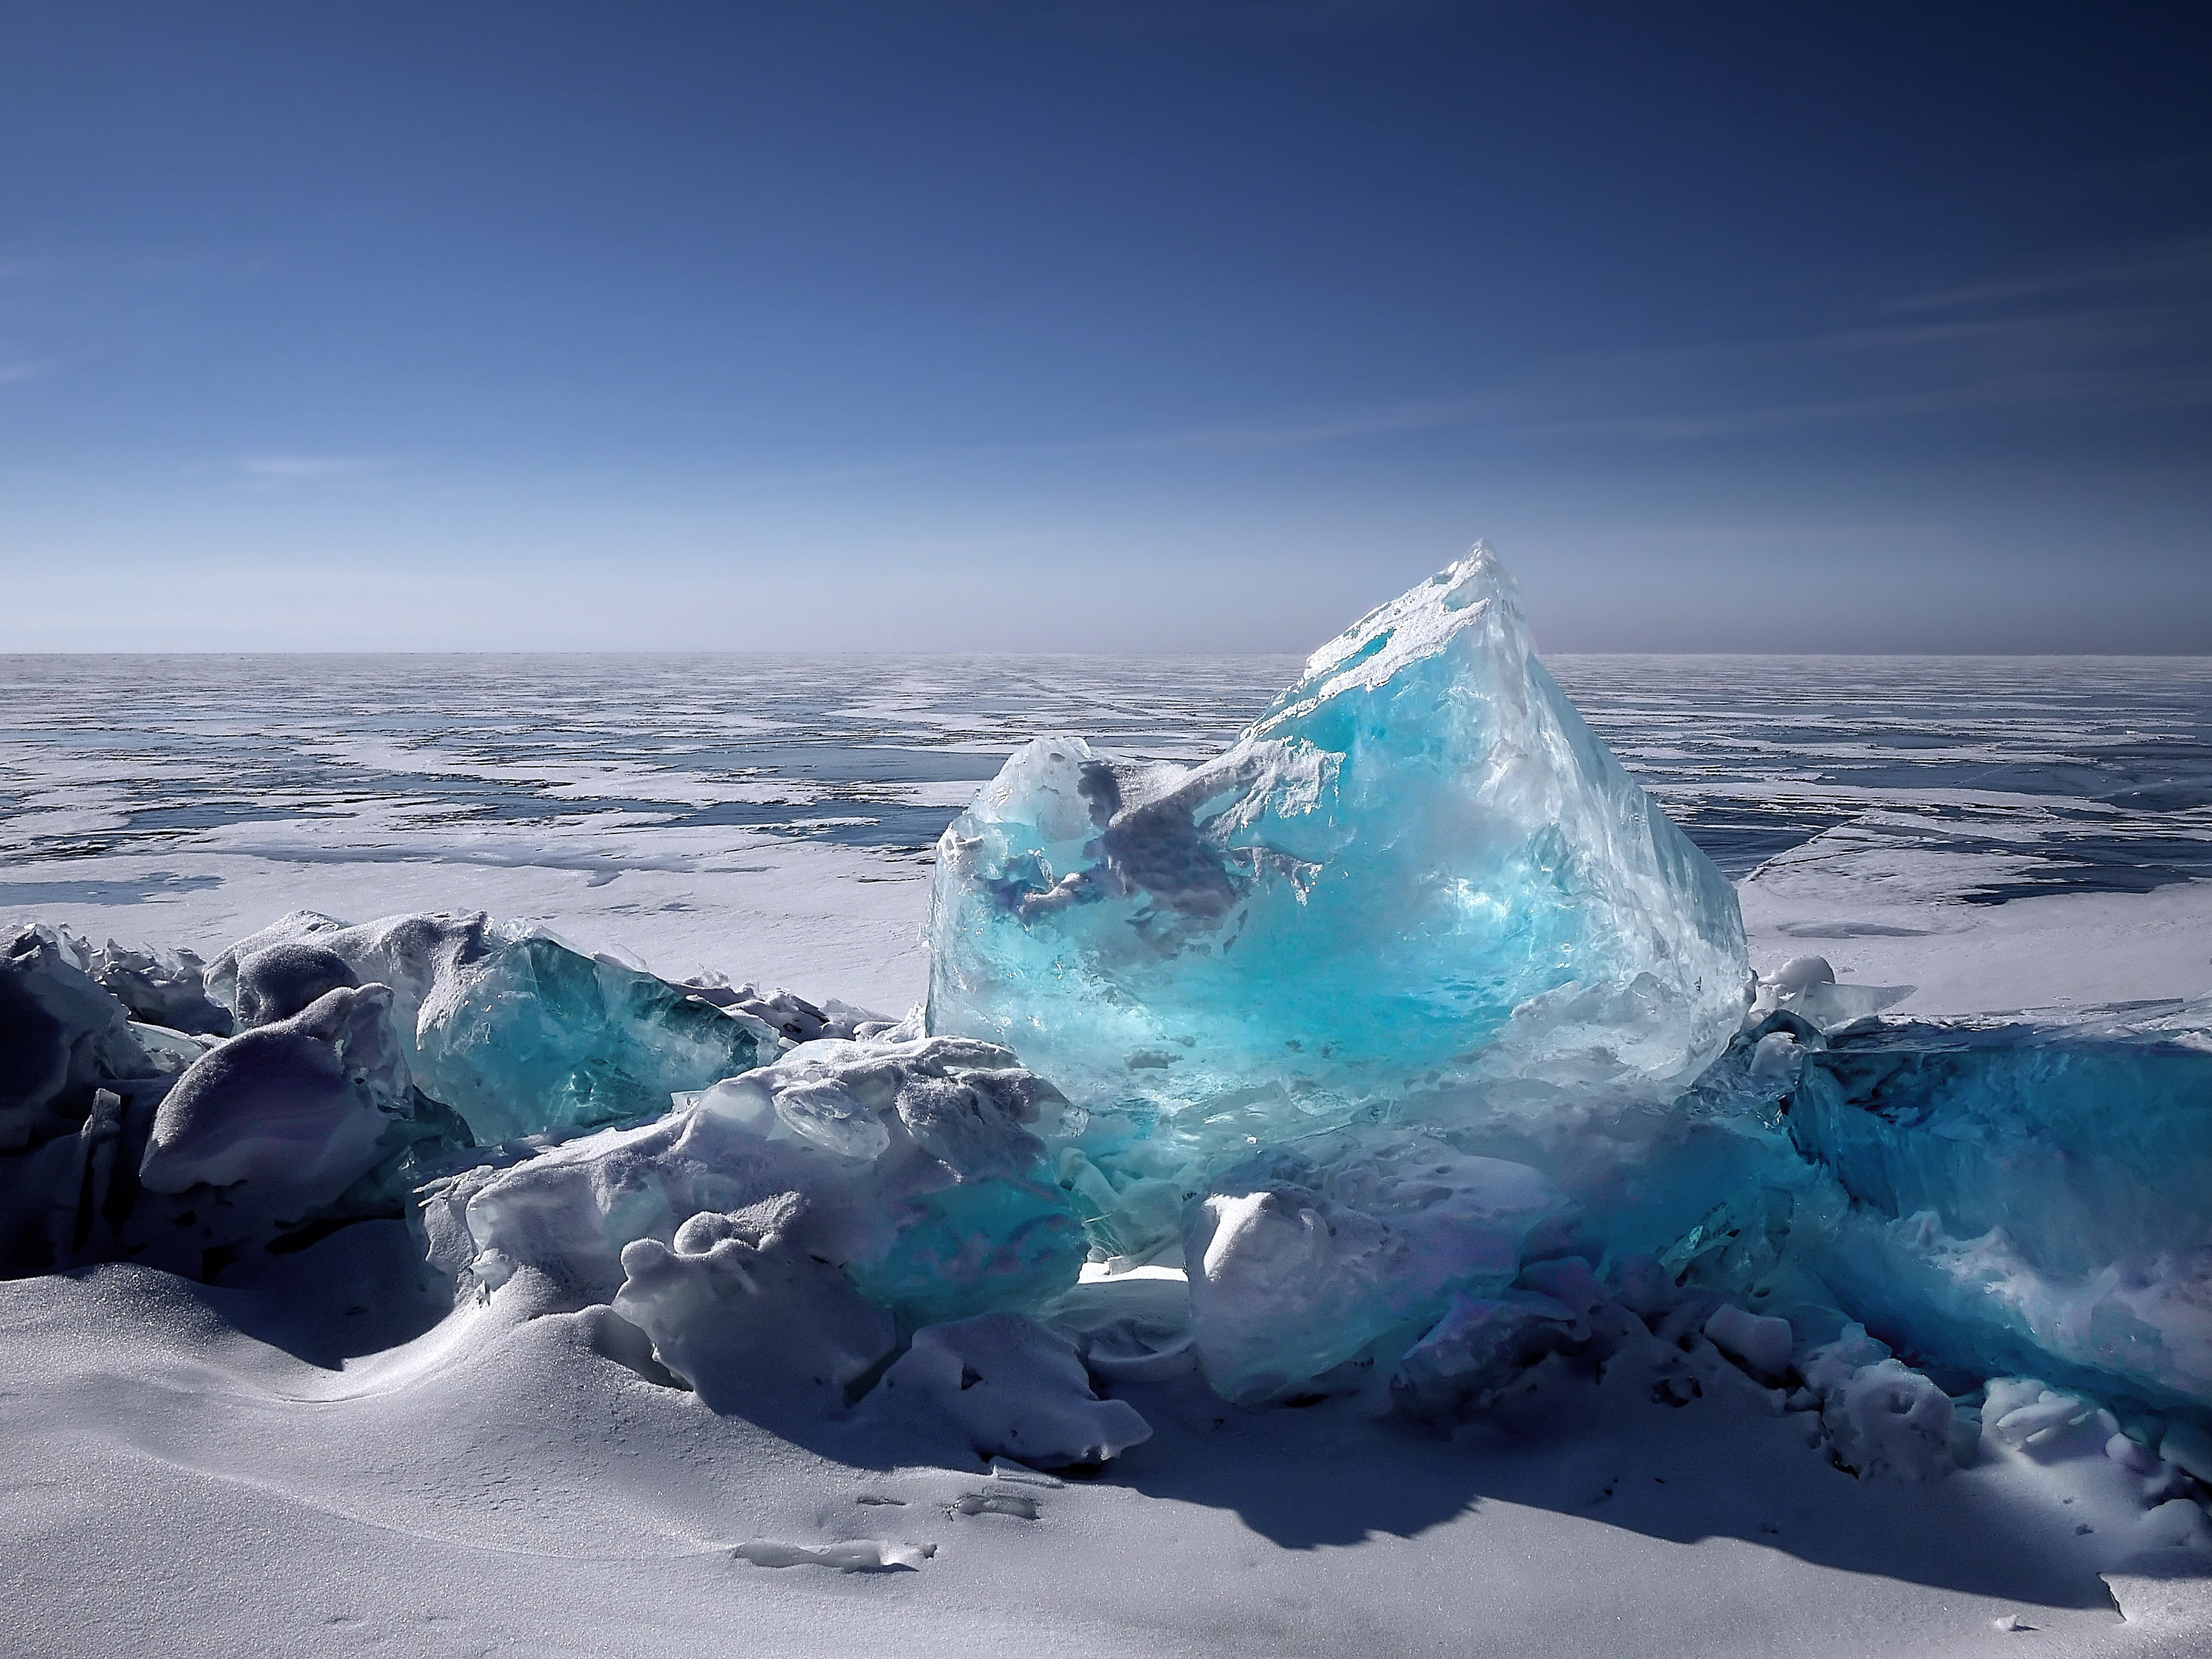 white and blue iceberg, winter, cold, frost, wintry, frozen, water